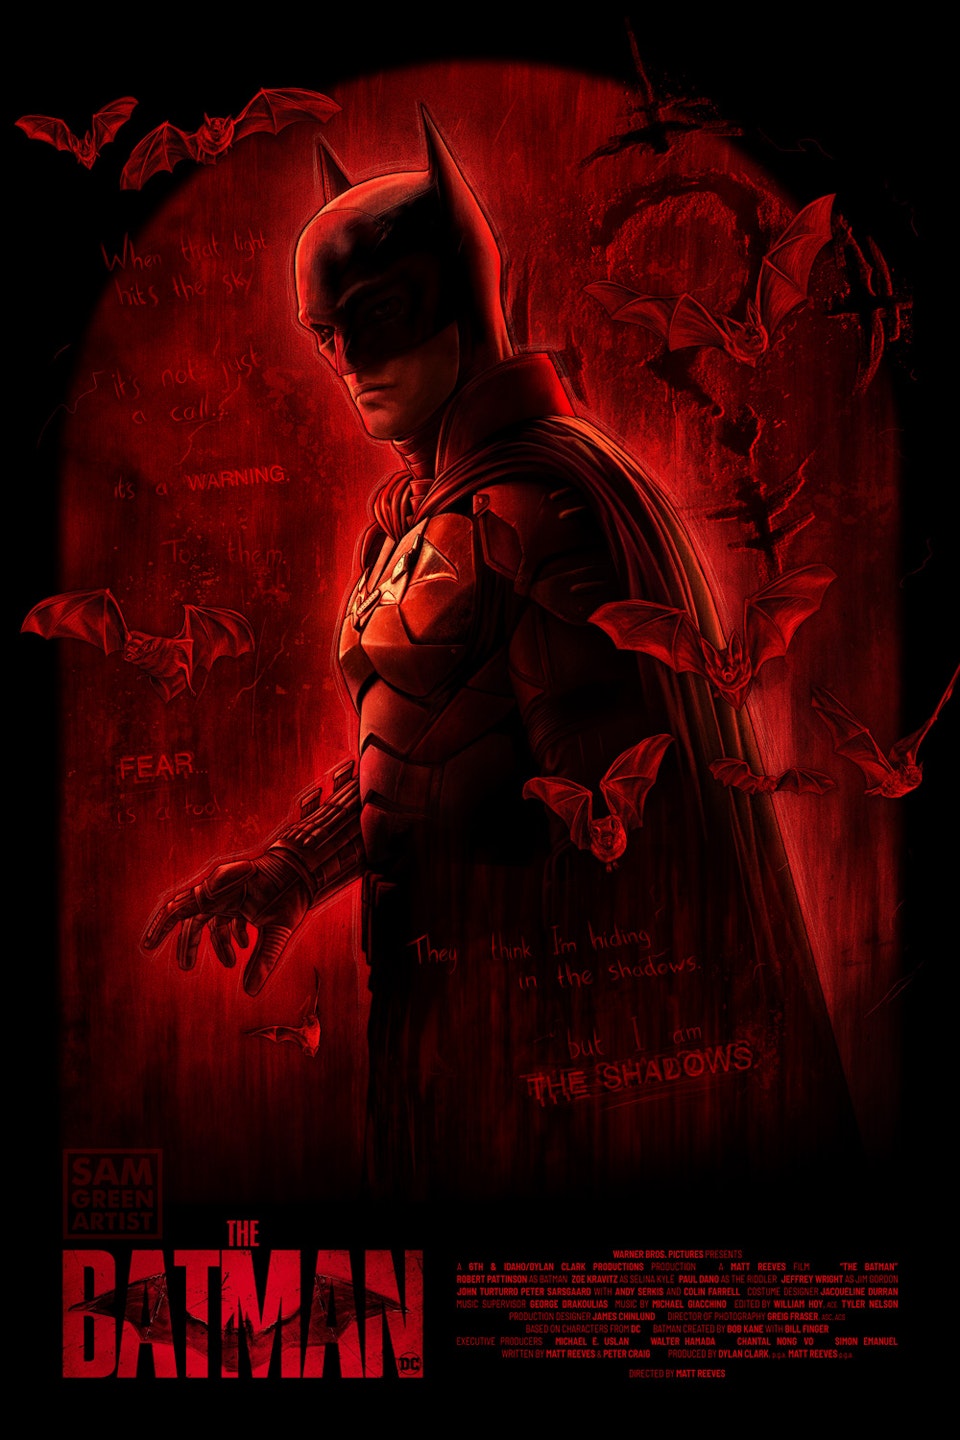 The Batman - Fan Art - The Batman - Mini poster (2022)

Initially started as a sketch made after seeing the film, I eventually decided to push it a bit further and add a title and billing block, making it into something of a mini poster.

Painted in Procreate on iPad Pro.